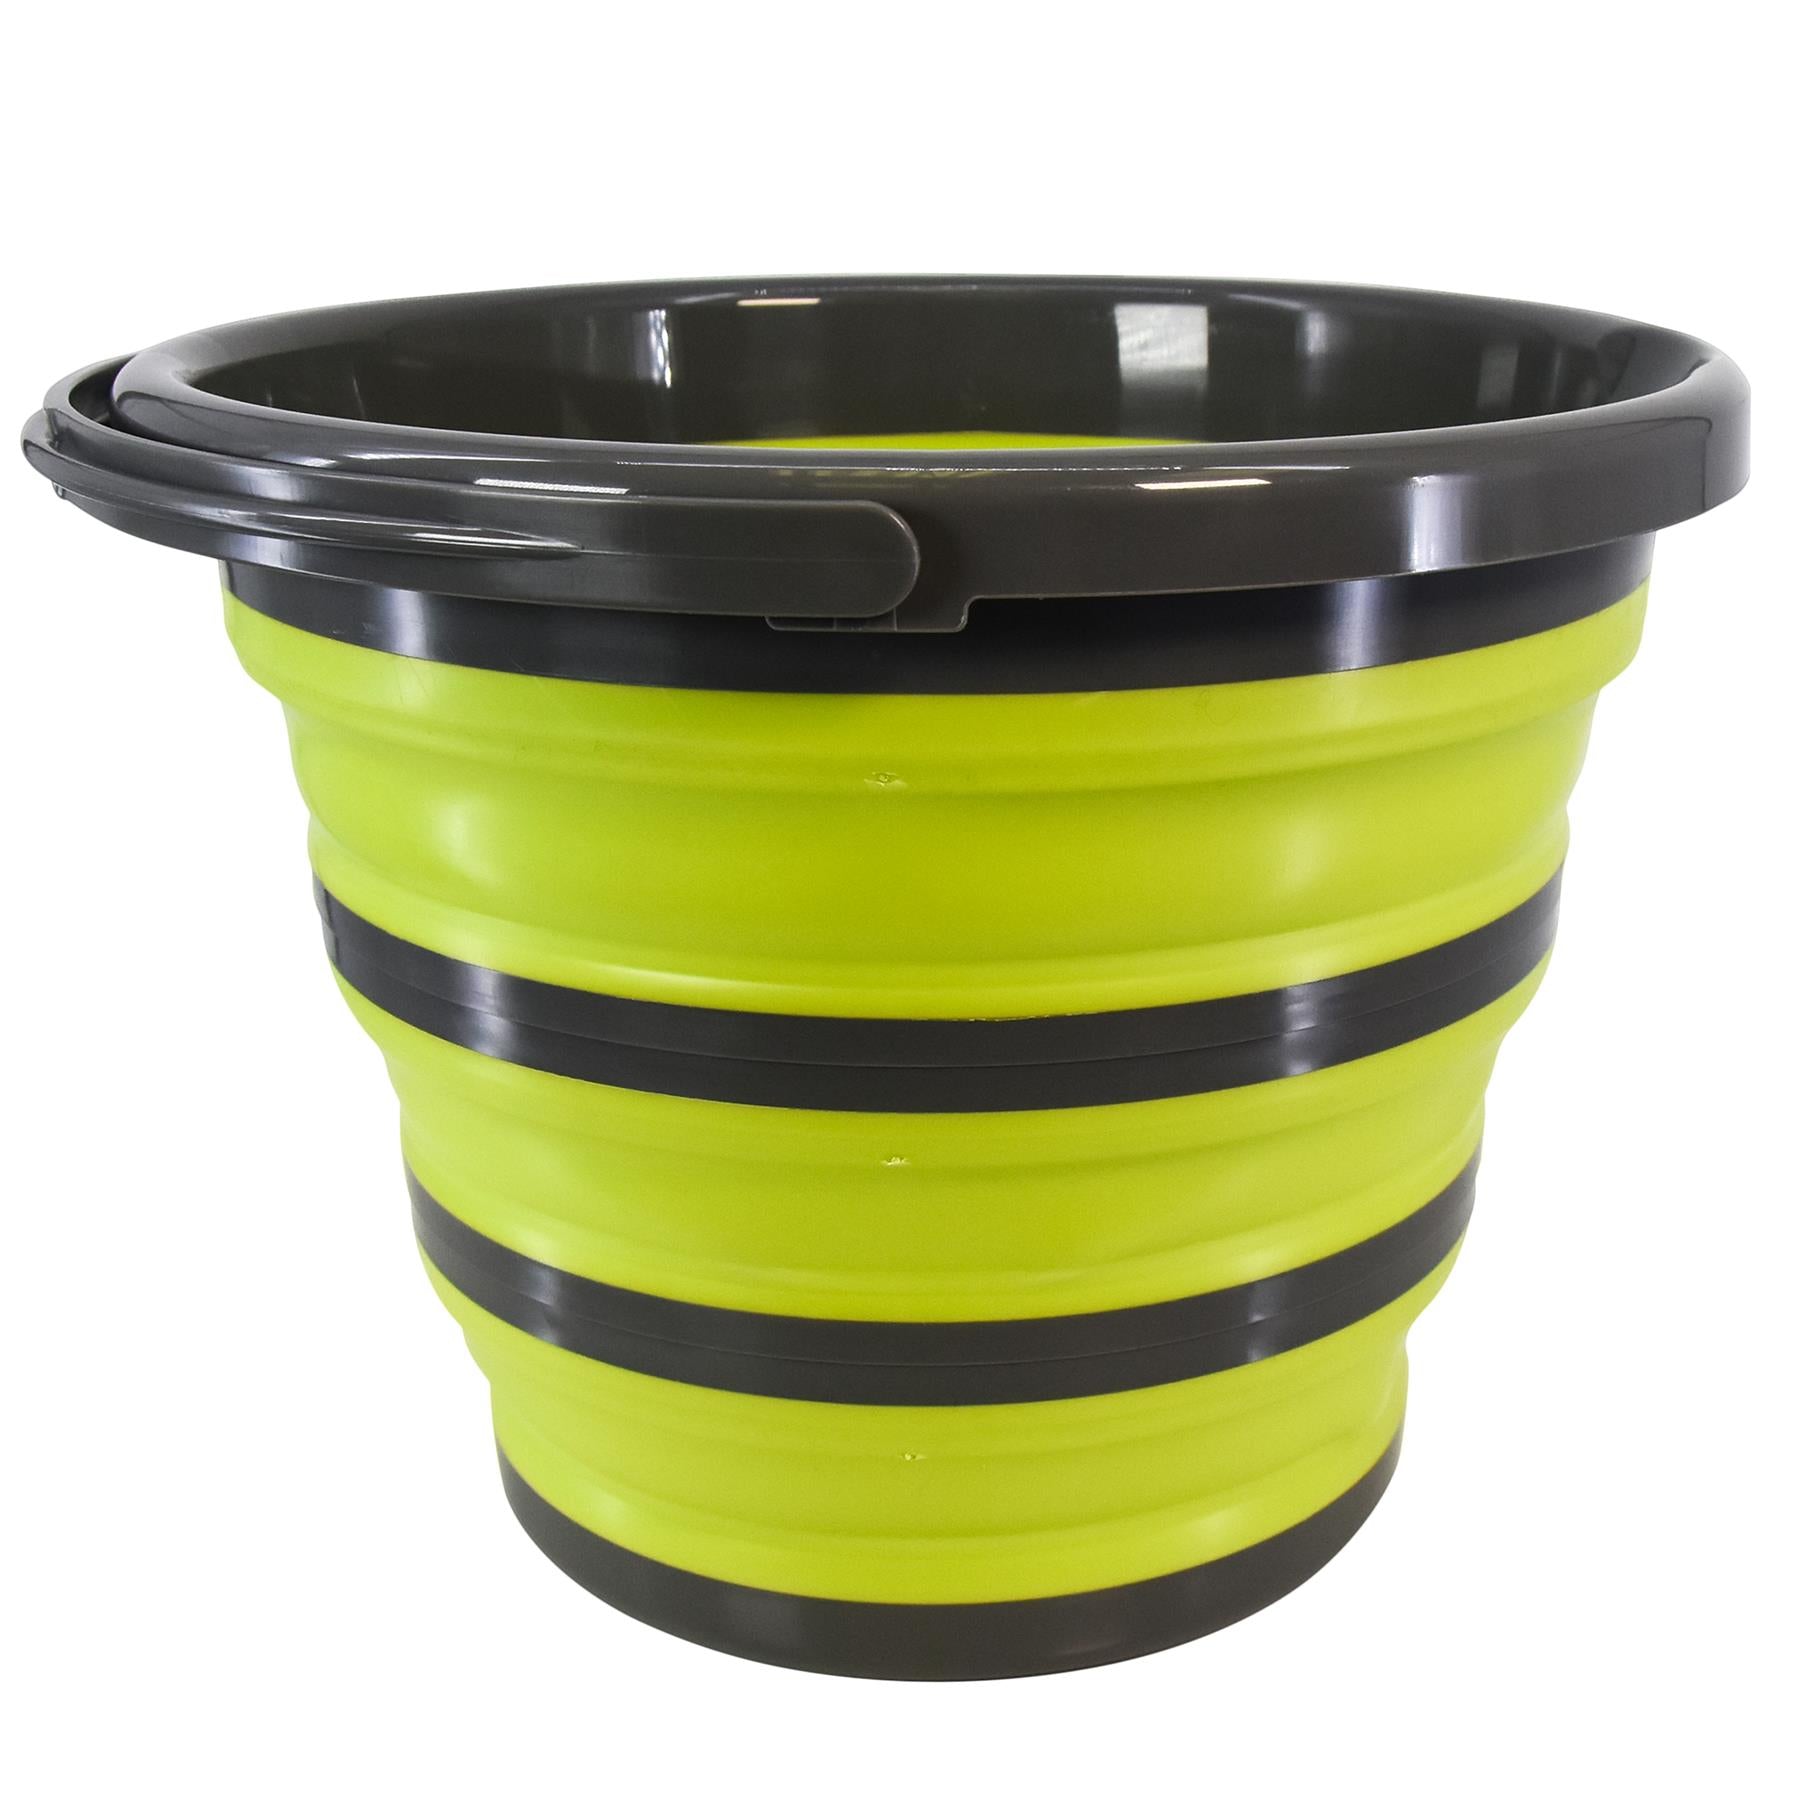 Folding Collapsible Bucket by Geezy - UKBuyZone